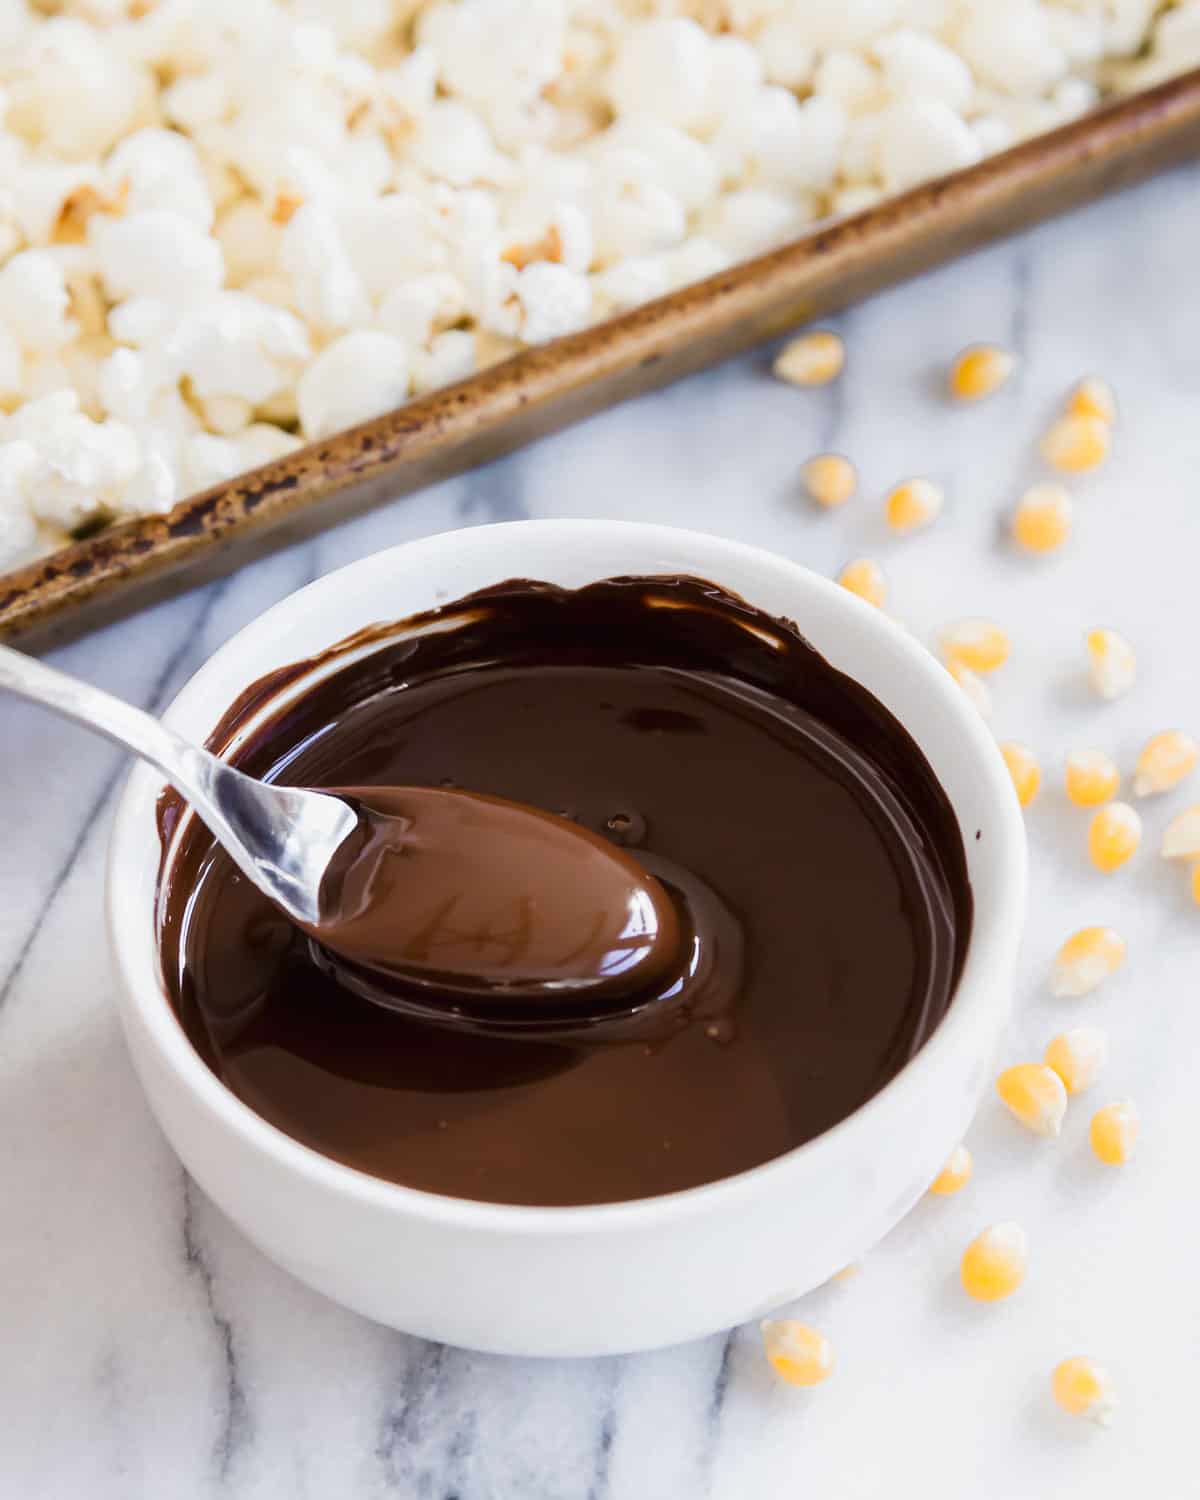 A baking sheet full of popcorn with chocolate sauce and a spoon.